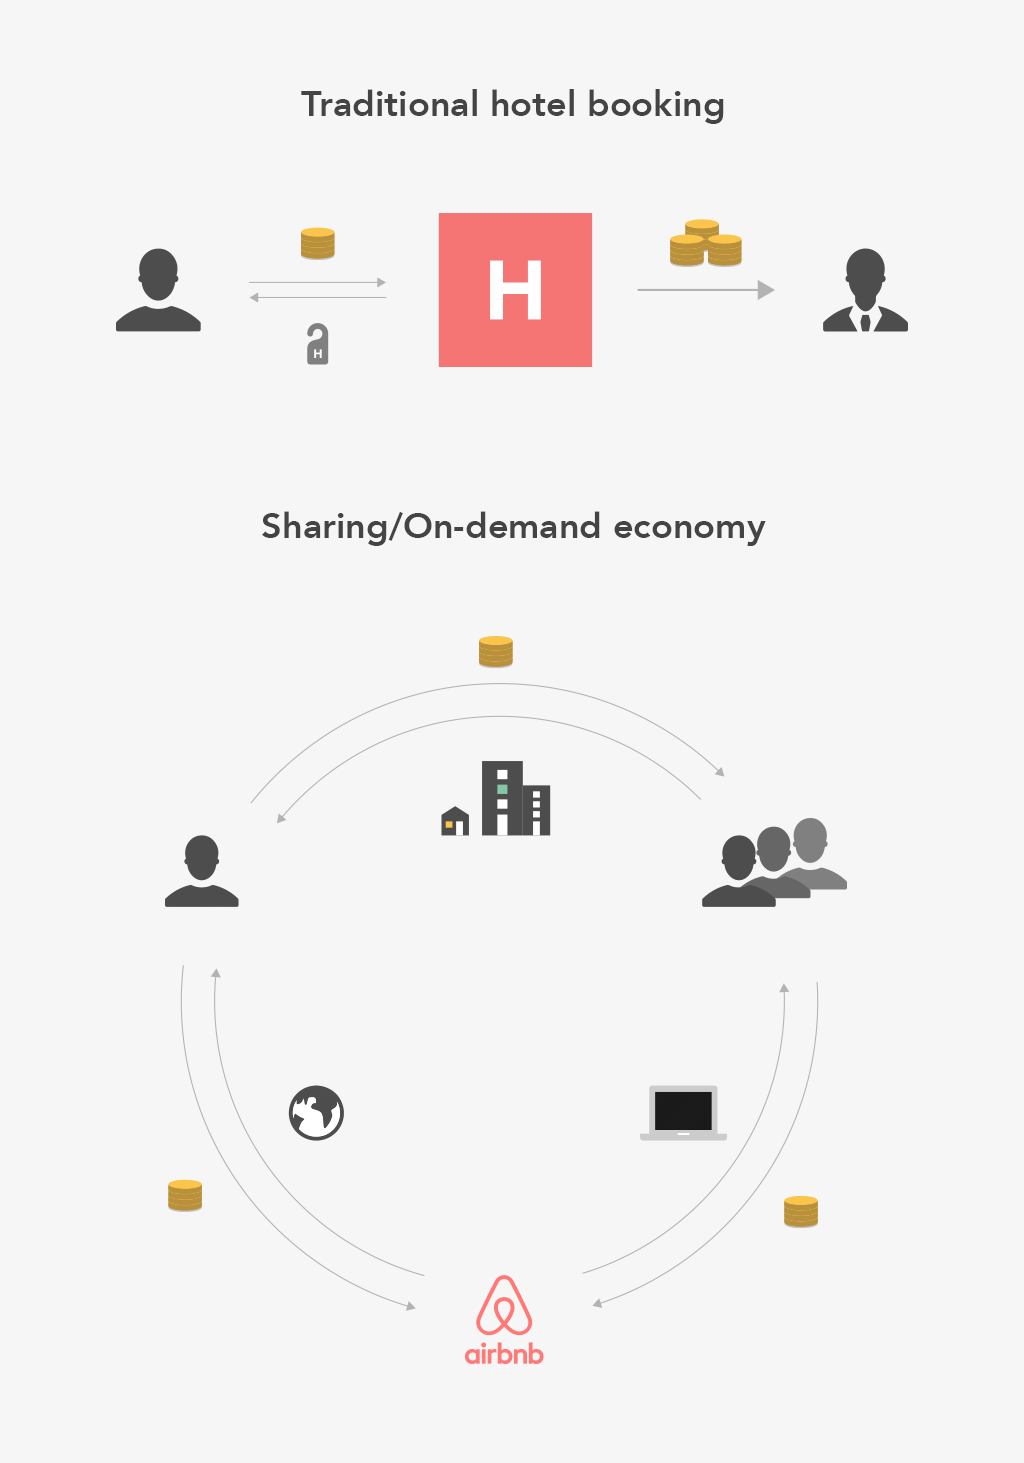 Traditional hotel booking vs. Sharing/On demand economy